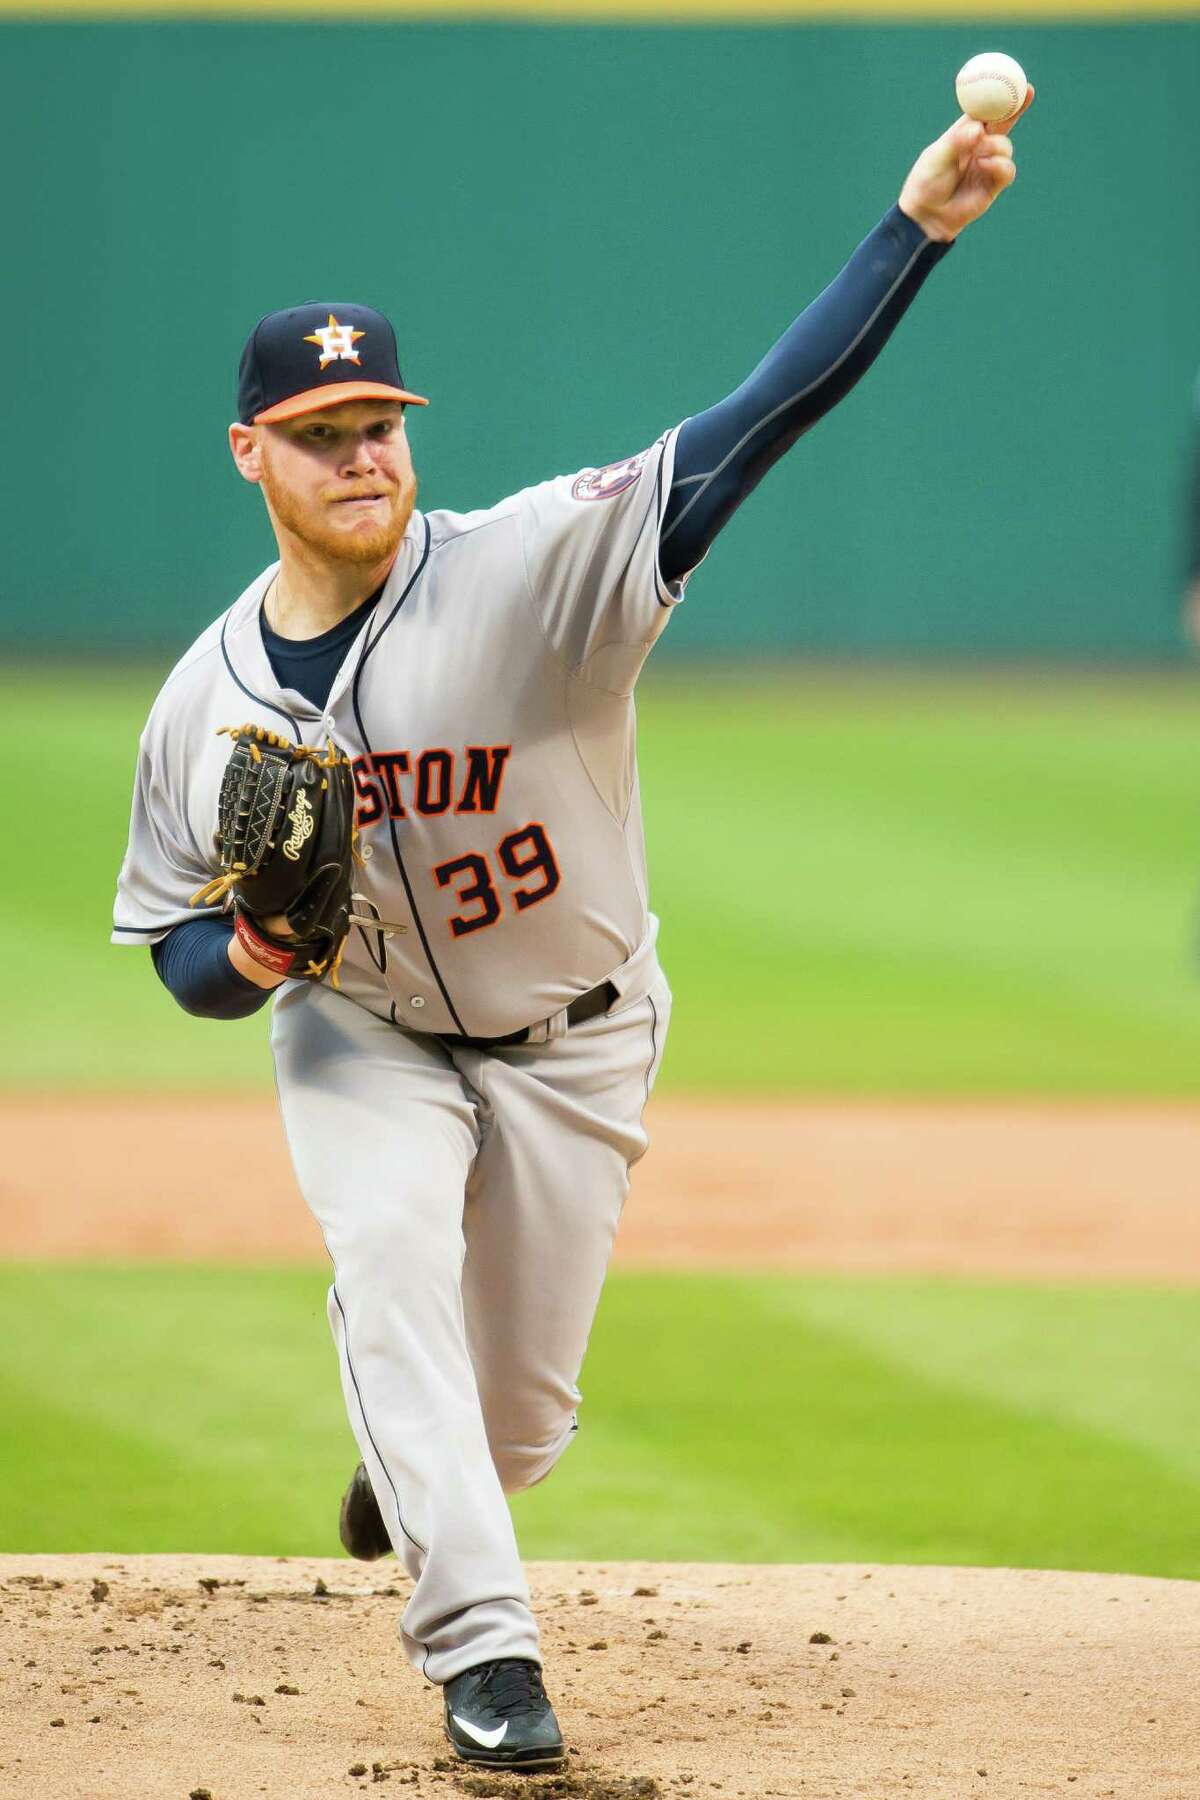 CLEVELAND, OH - JULY 09: Starting pitcher Brett Oberholtzer #39 of the Houston Astros pitches during the first inning against the Cleveland Indians at Progressive Field on July 9, 2015 in Cleveland, Ohio.